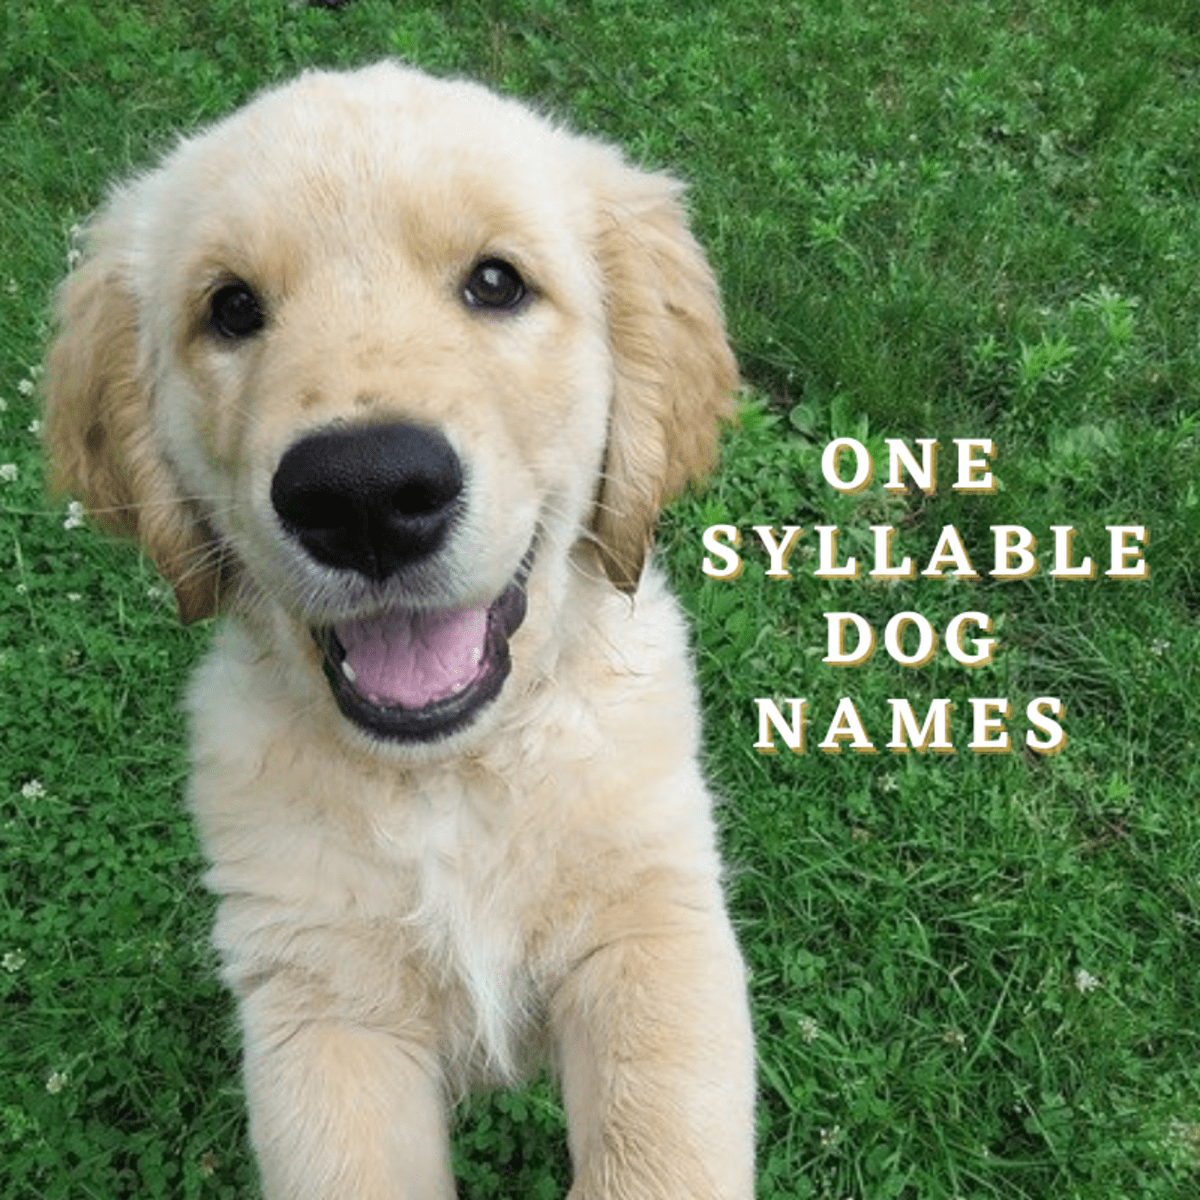 how many syllables can dogs understand